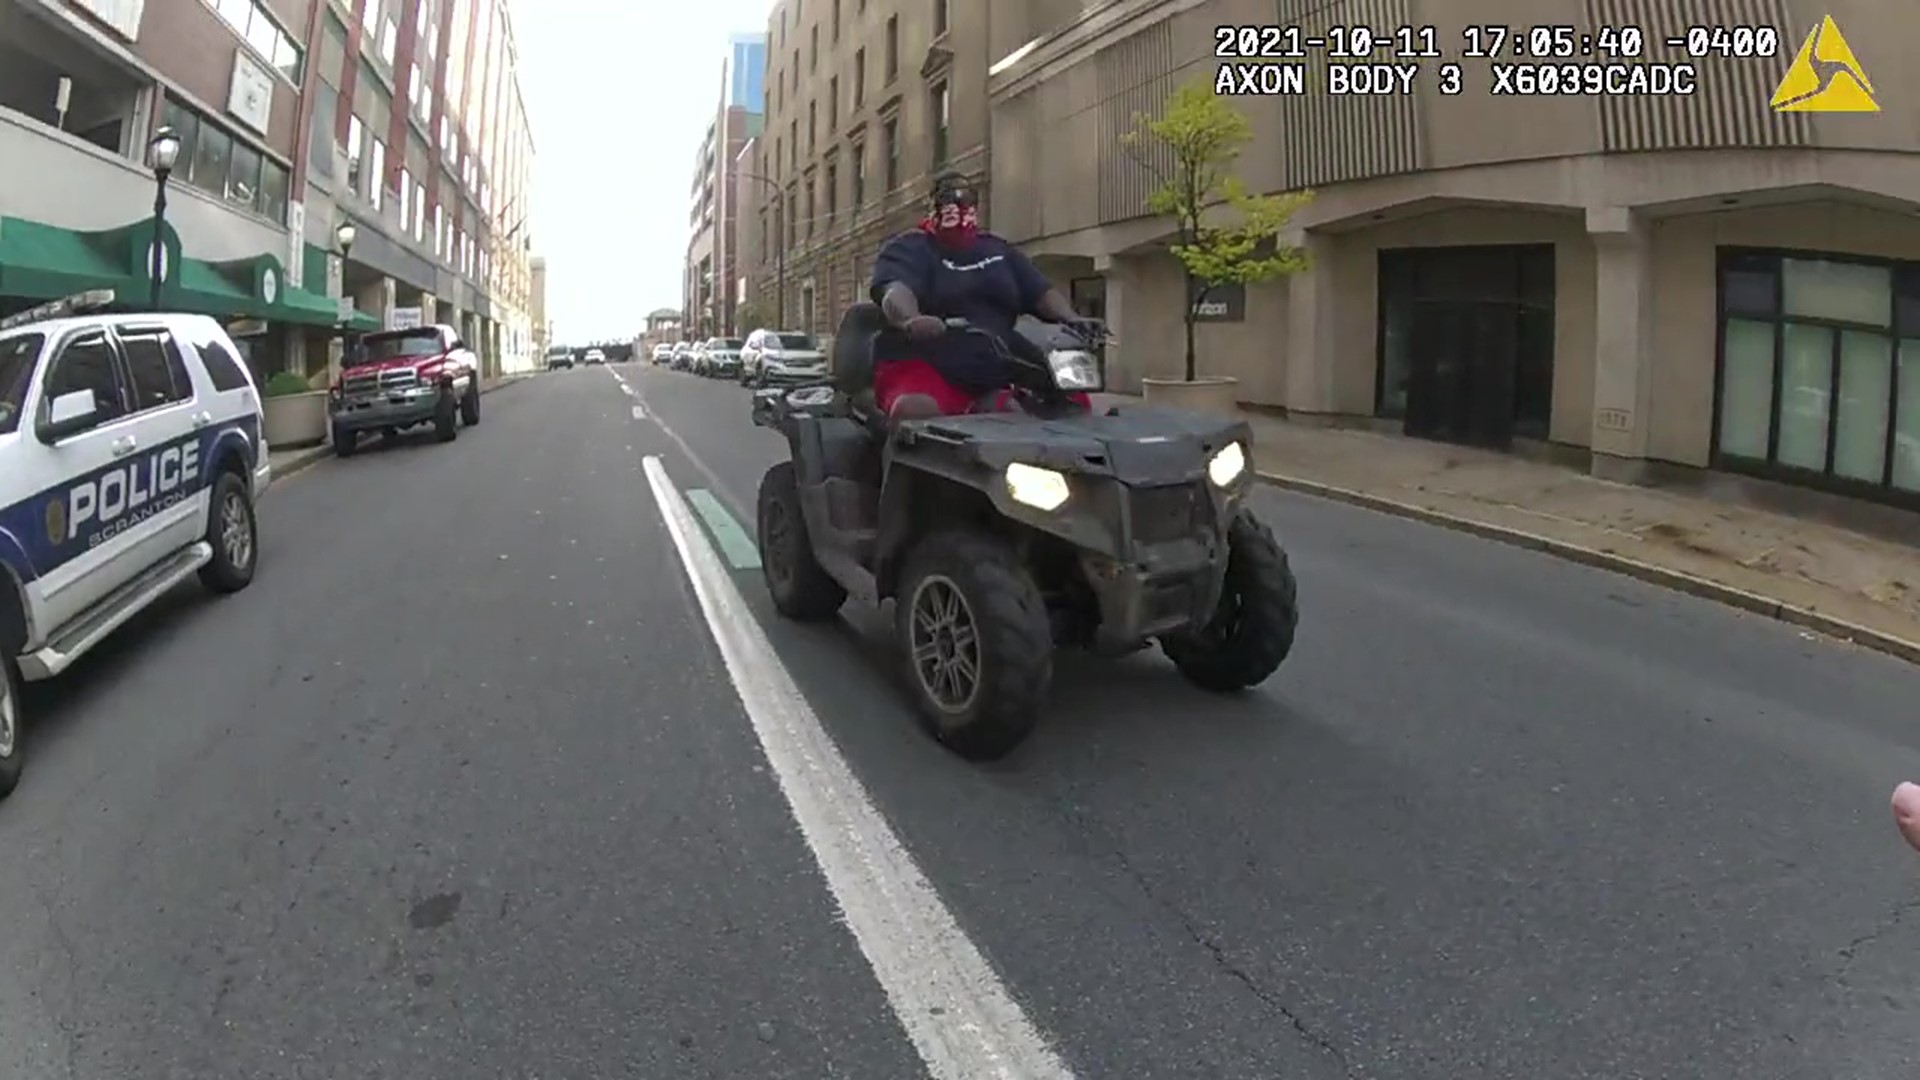 We talked to the officer who says this incident is part of a larger problem illegal ATV use on city streets.